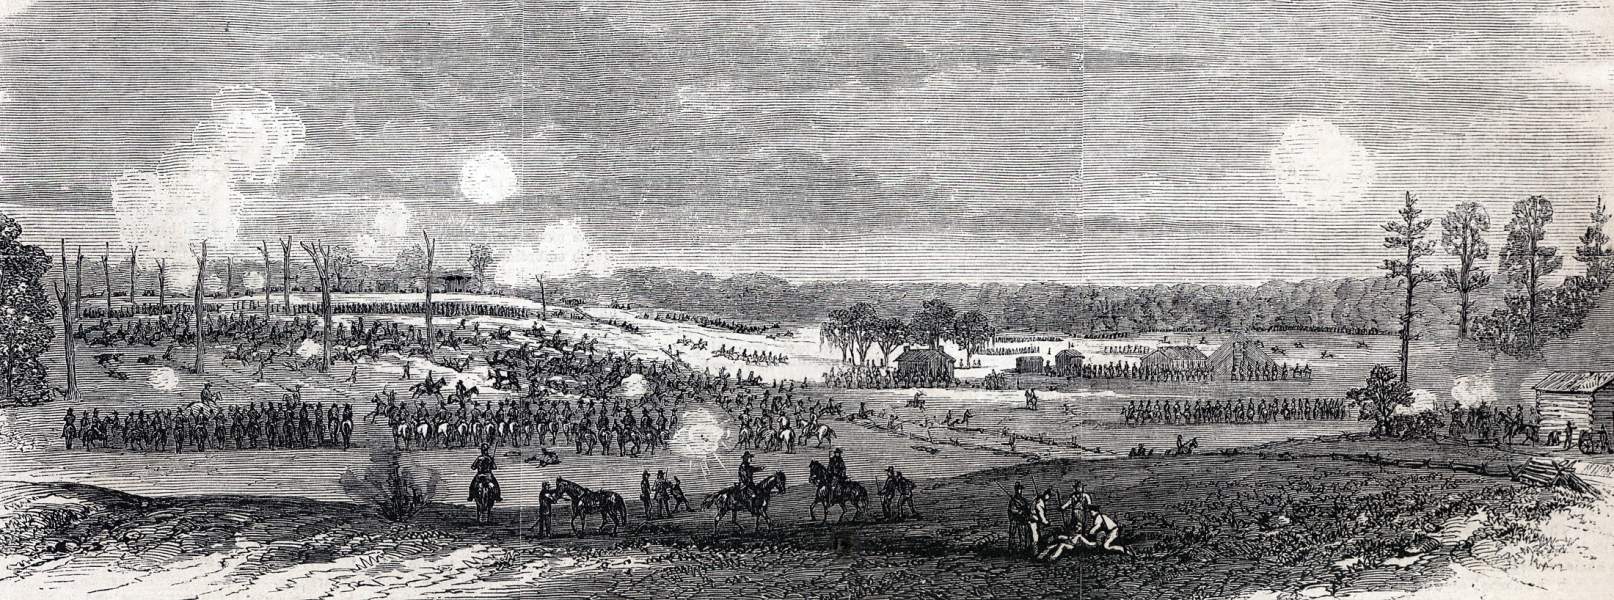 Battle of Mansfield, Louisiana, April 8, 1864, artist's impression, zoomable image